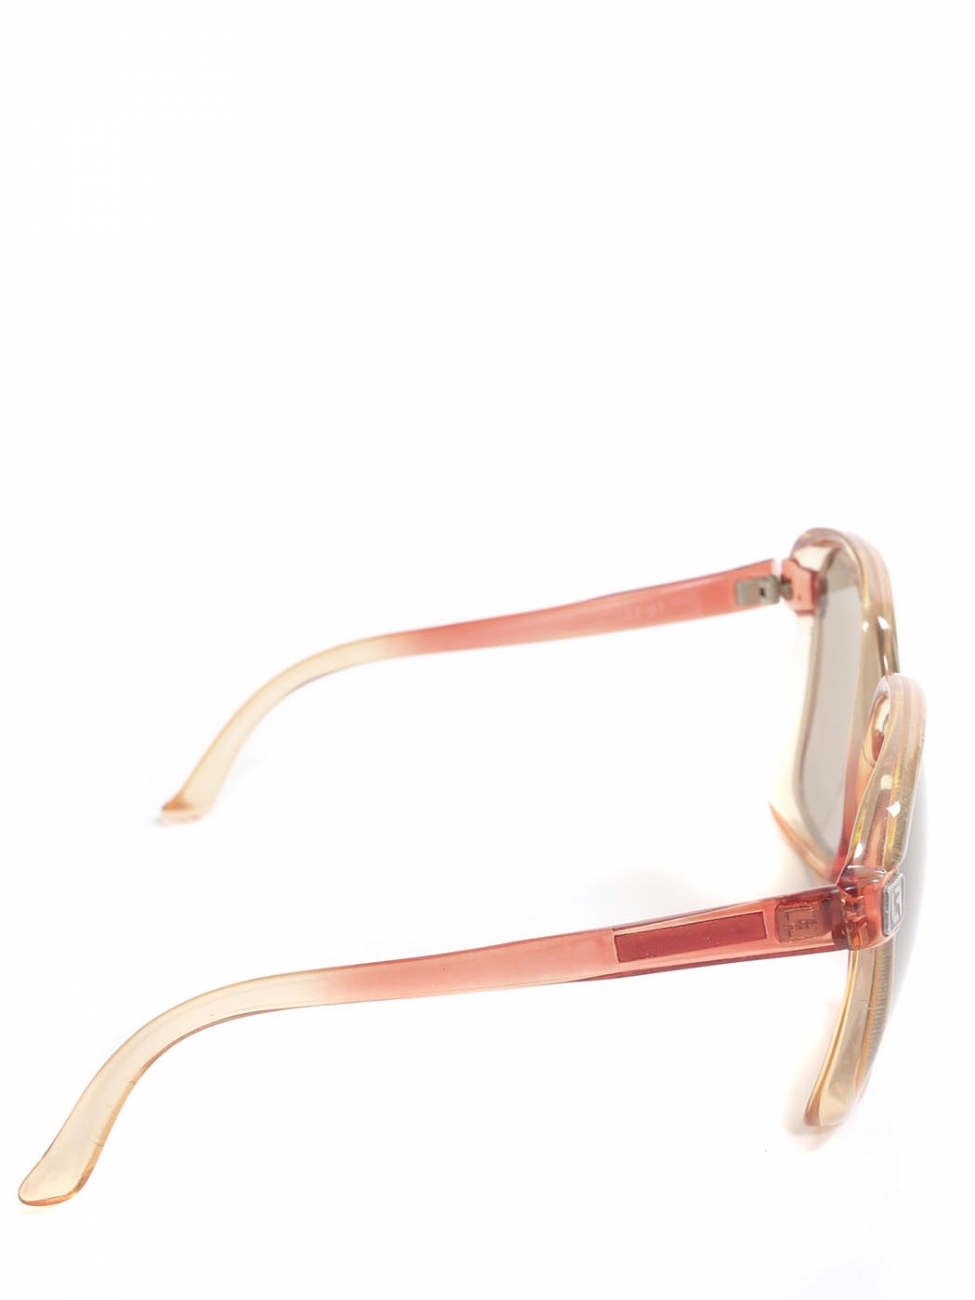 Boutique LOUIS FÉRAUD Red, orange, and yellow oversized sunglasses